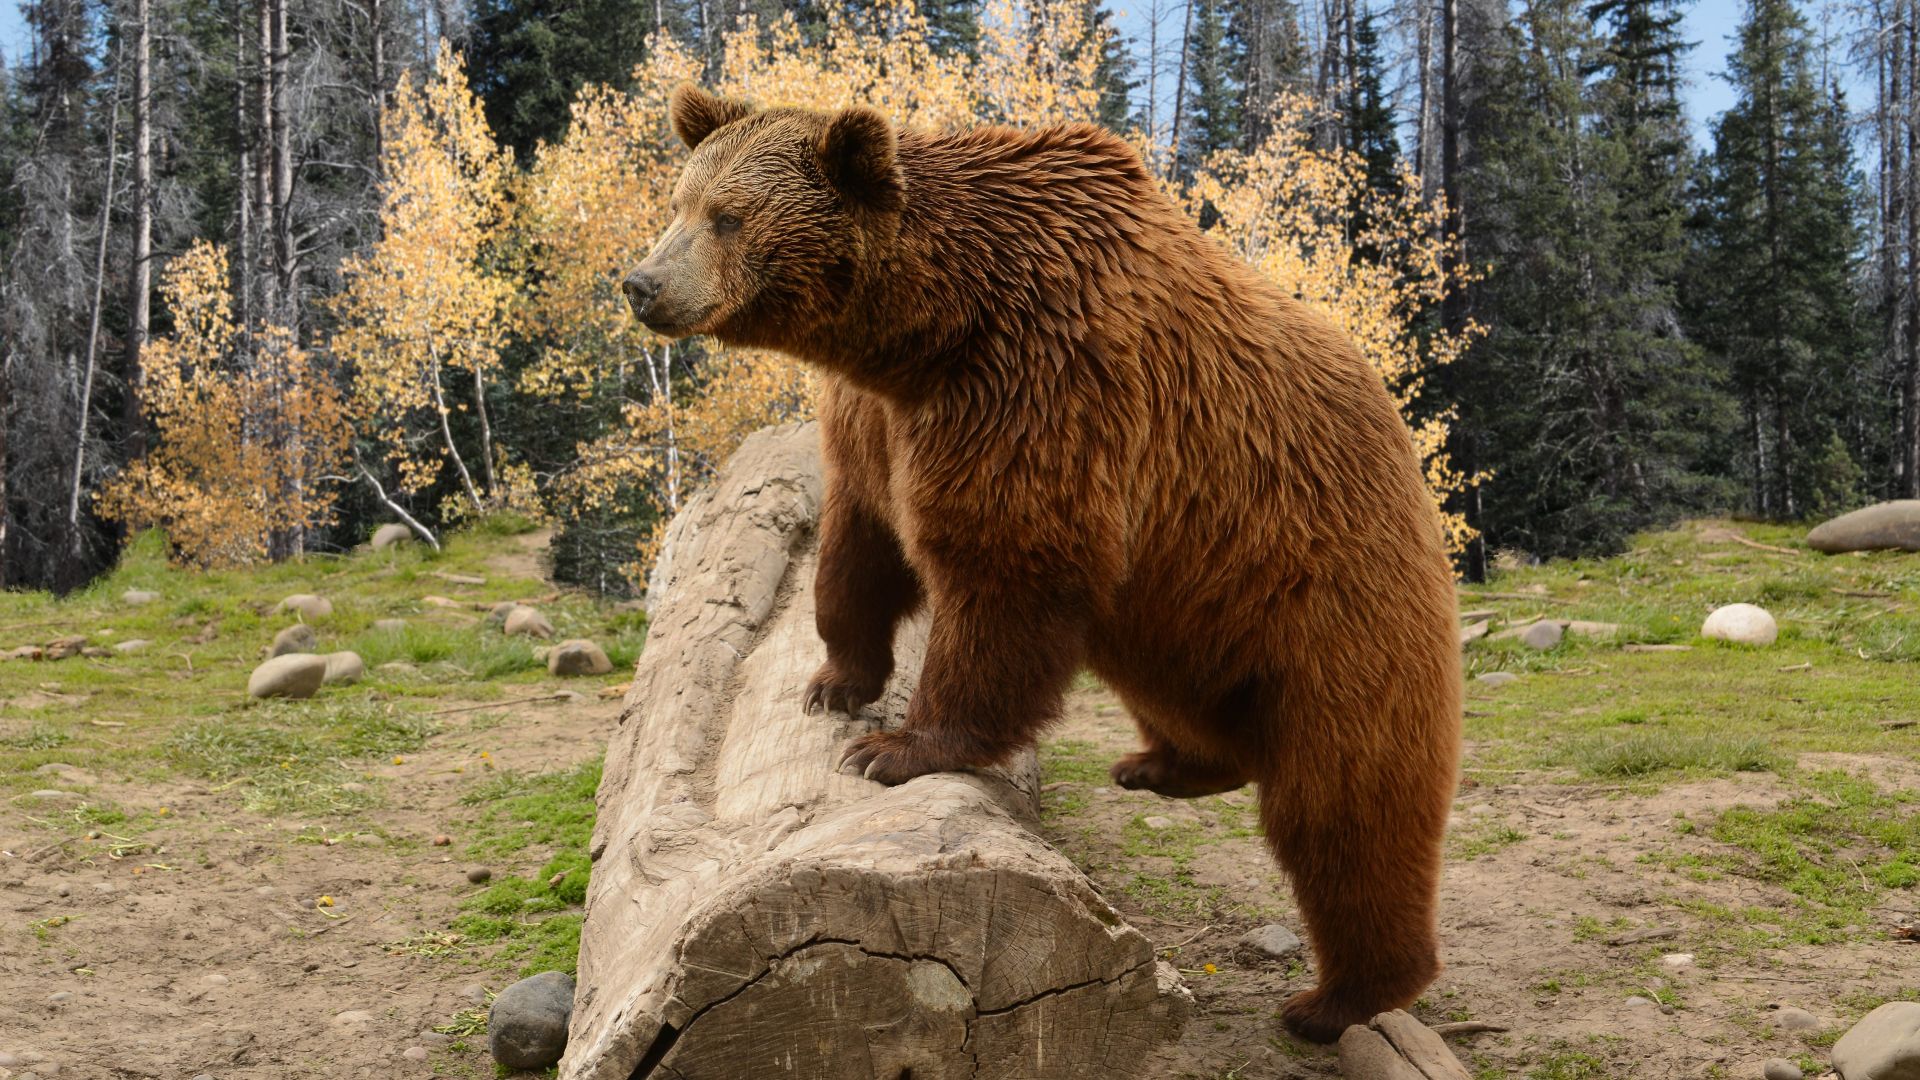 <p>                     Grizzly bears were listed as a threatened species in the lower 48 states in 1975, but as of 2016, approximately 700 grizzly bears were estimated to live in the greater area of Yellowstone. A grizzly bear sighting is certainly thrilling, but unlike a lot of wildlife, they should always be considered dangerous. They are most active at dawn and dusk. To view them from a distance, head to the Hayden and Lamar valleys, the north slopes of Mount Washburn, and the East Entrance.                    </p>